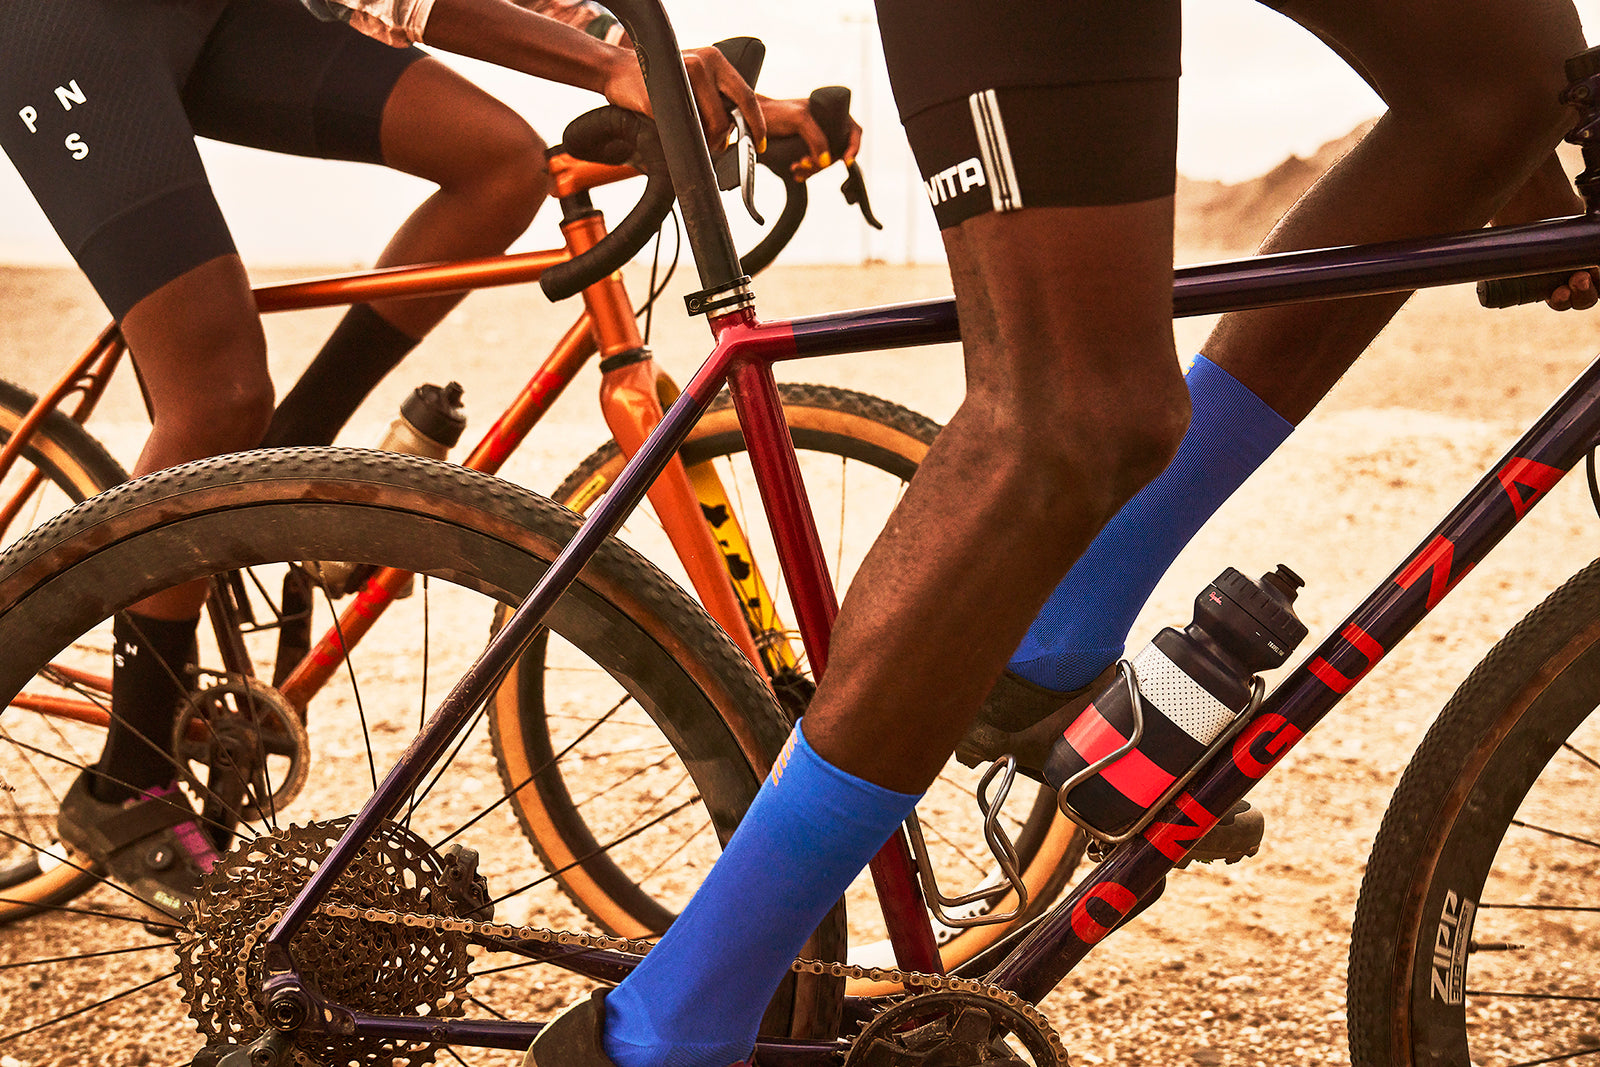 Two black Namibian cyclists, a man in the foreground and a woman in the background, riding in the Namibian desert on ONGUZA Goat Gravel bikes. The shot is cropped around the bikes and their legs. The bike in the foreground is Eastwind Purple, and the background is Gold Dune colors. The man is wearing electric blue socks which contrasts with the colors of the bikes. Photo by Ben Ingham